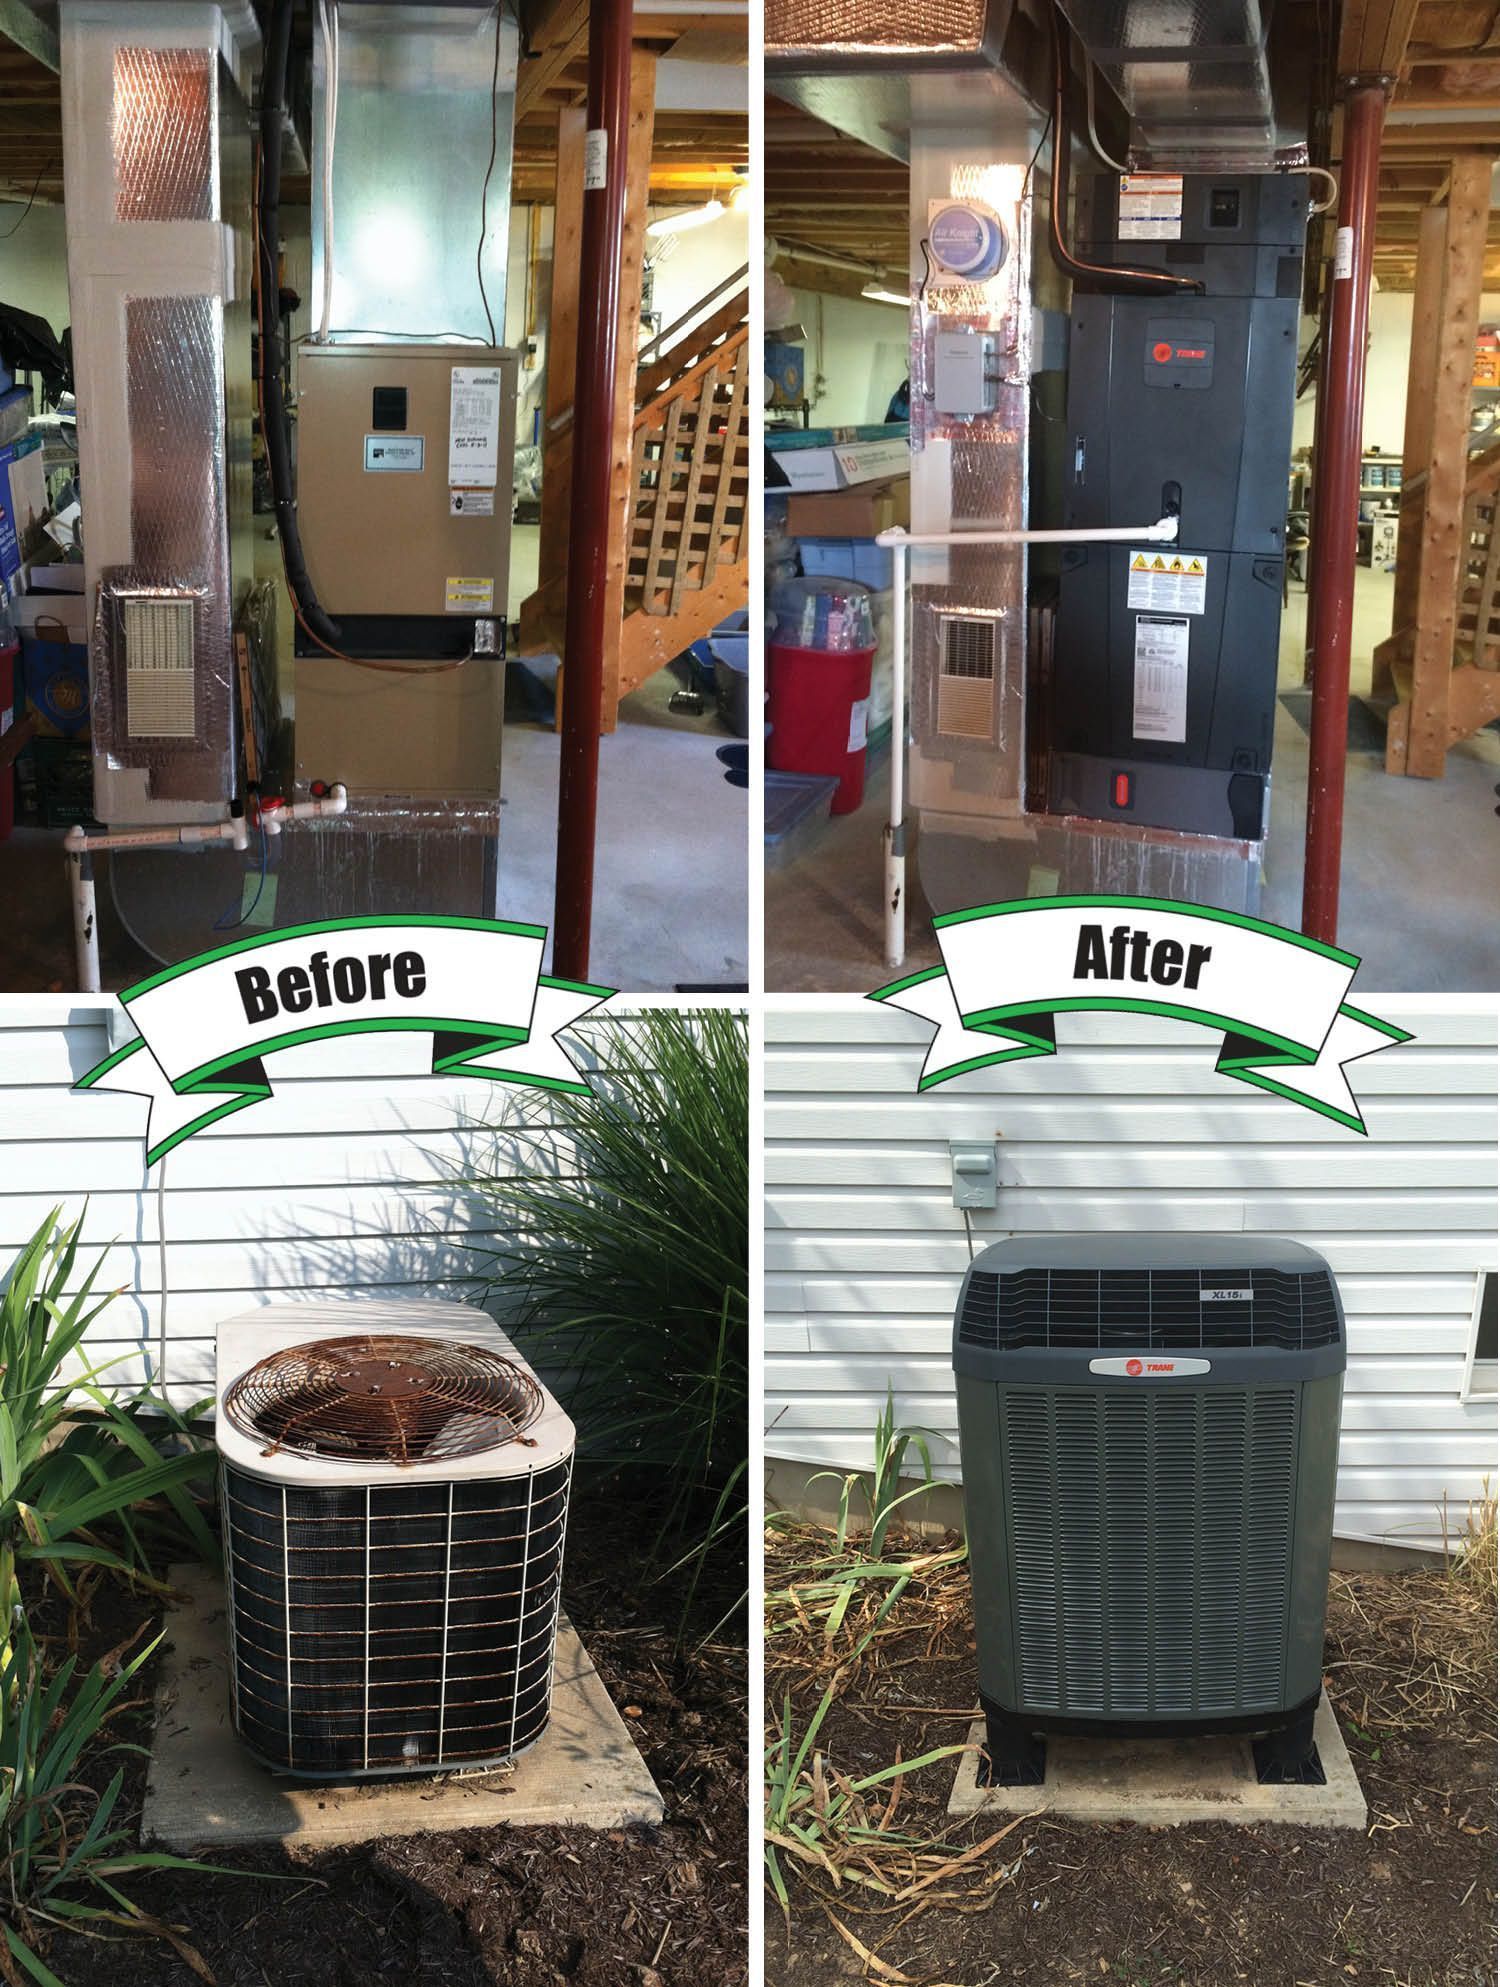 A before and after picture of an air conditioner